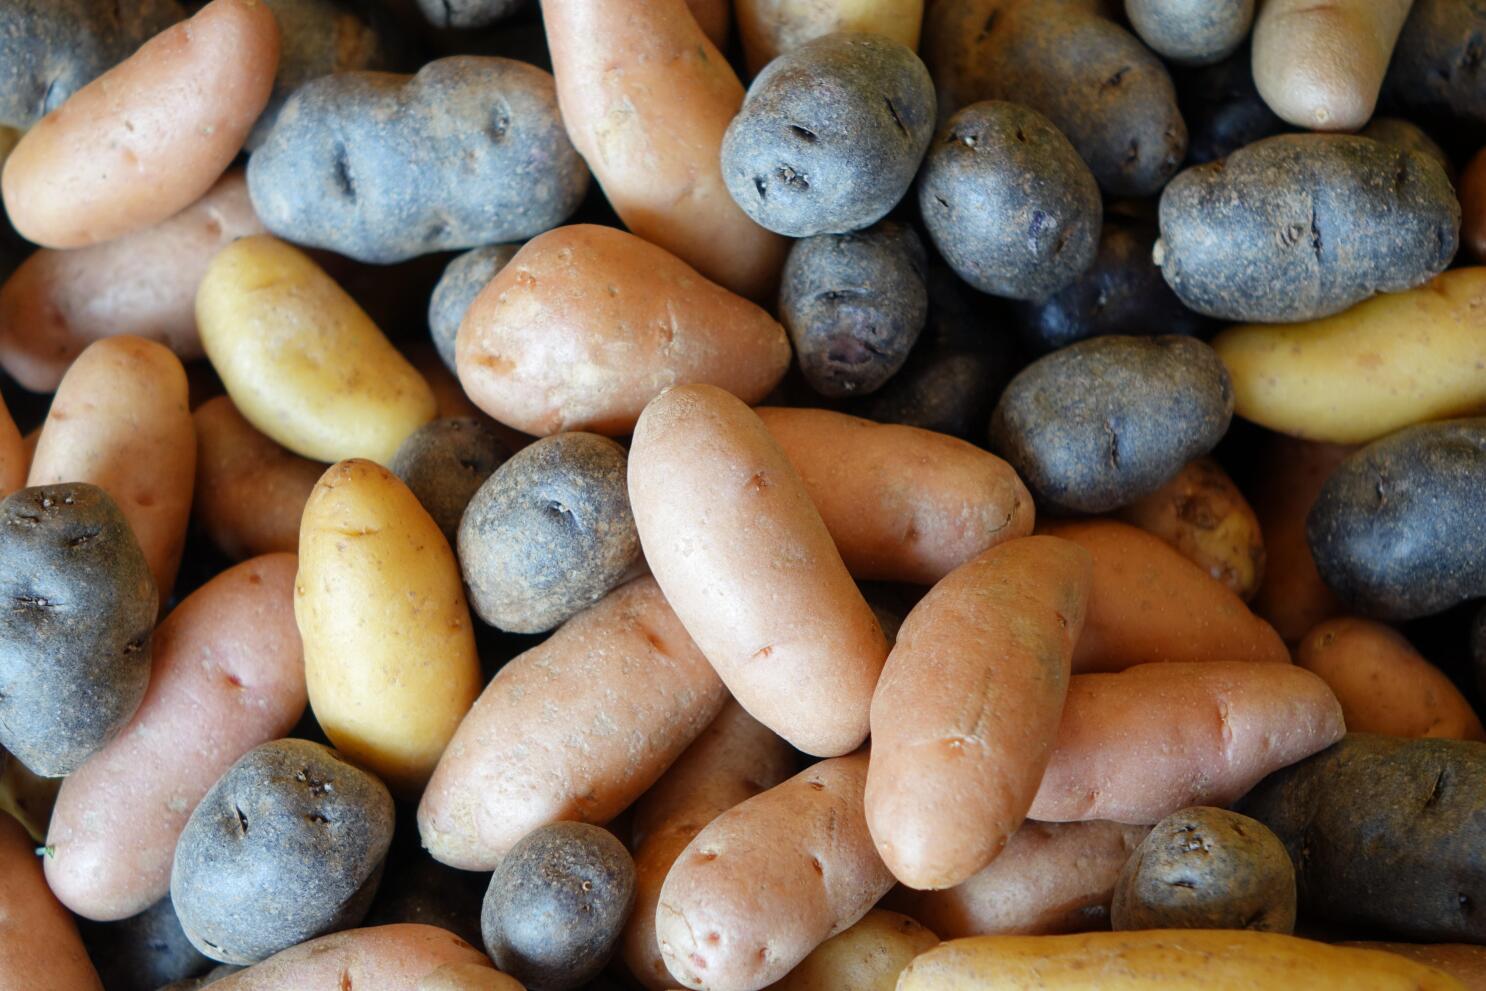 Growing Potatoes At Home Is A Lot Of Tubers And Easy For Beginners 